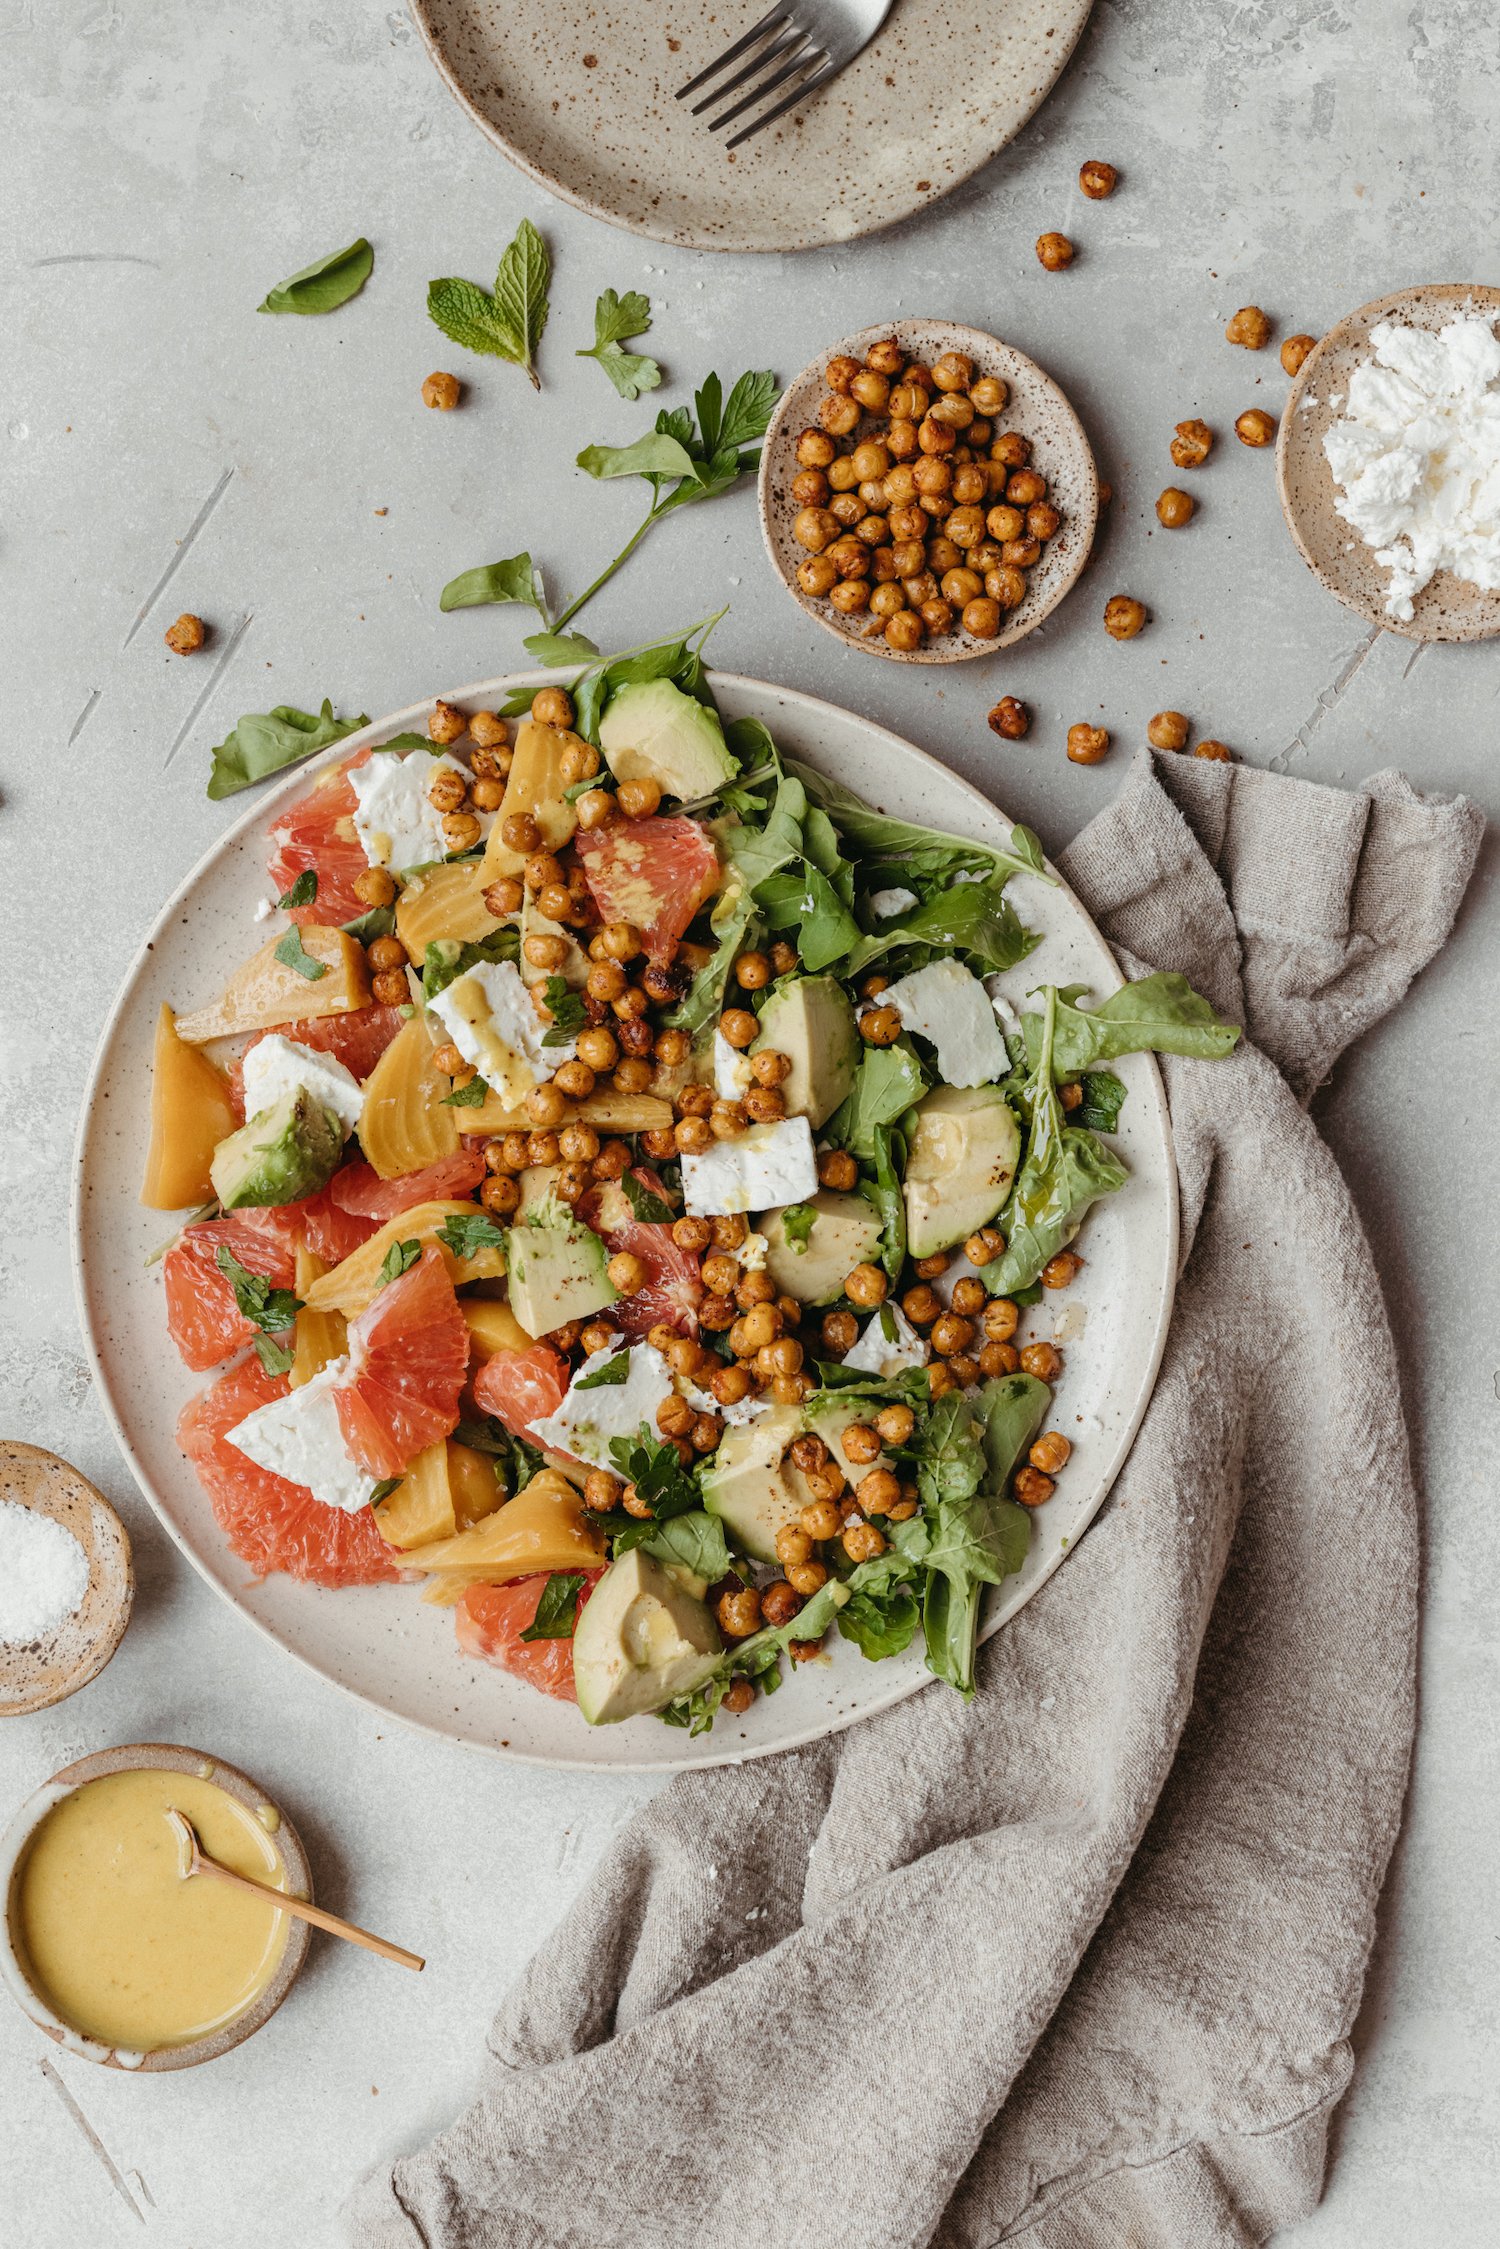 Grapefruit Avocado Salad with Golden Beets, Crispy Chickpeas and Feta - Easy and Healthy Lunch